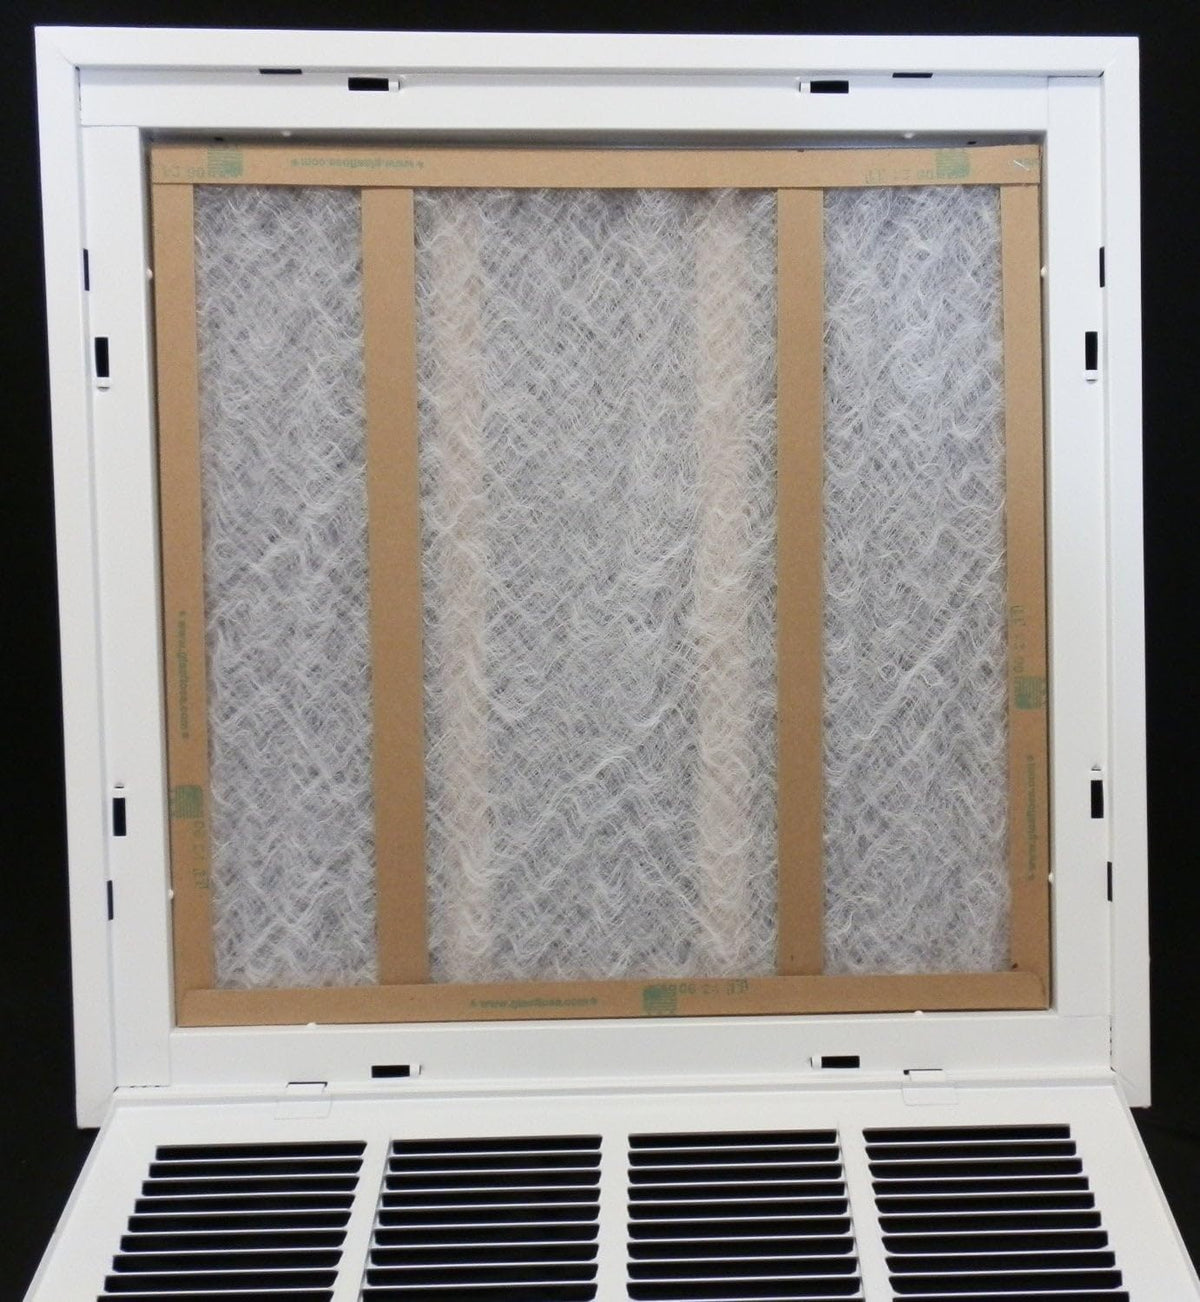 32&quot; X 12&quot; Steel Return Air Filter Grille for 1&quot; Filter - Removable Frame - [Outer Dimensions: 34 5/8&quot; X 14 5/8&quot;]